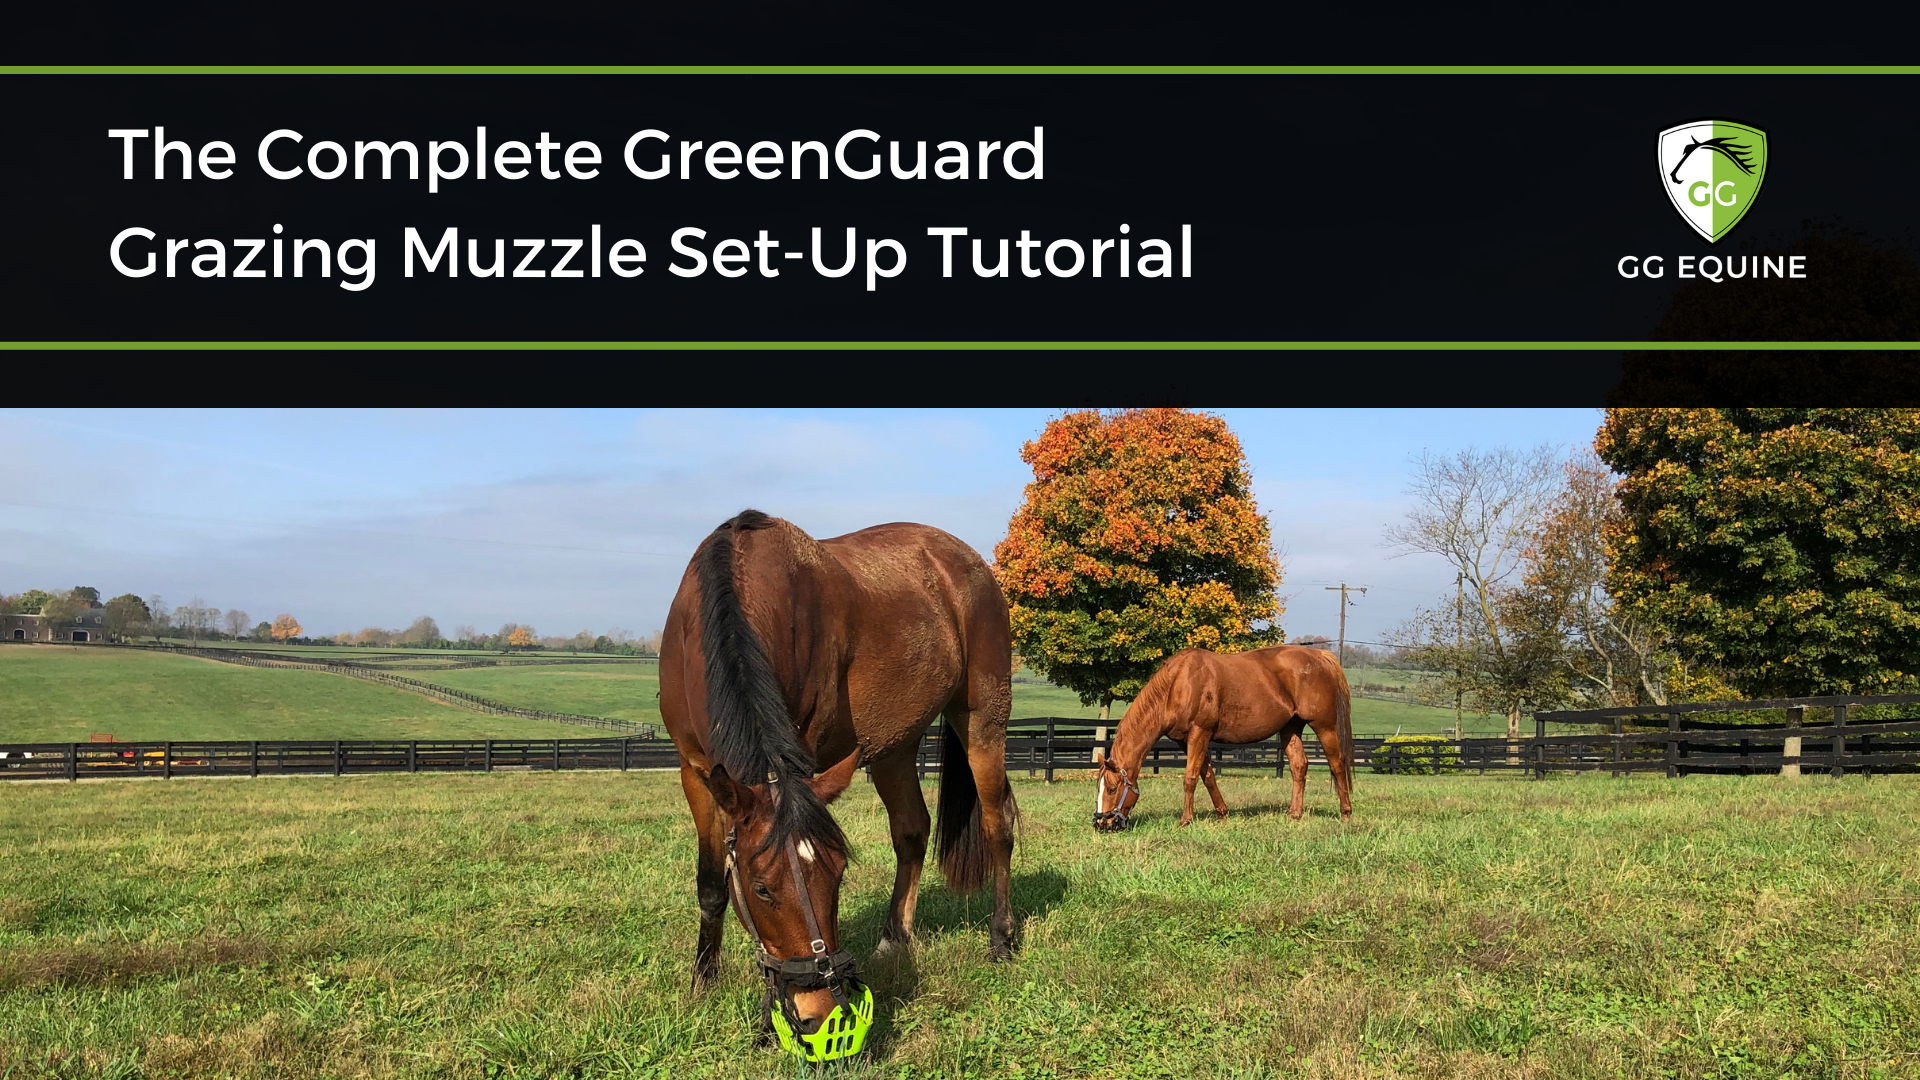 Load video: Full tutorial and instruction video for setting up the GreenGuard Grazing Muzzle, connecting it to a halter, and major accessories.